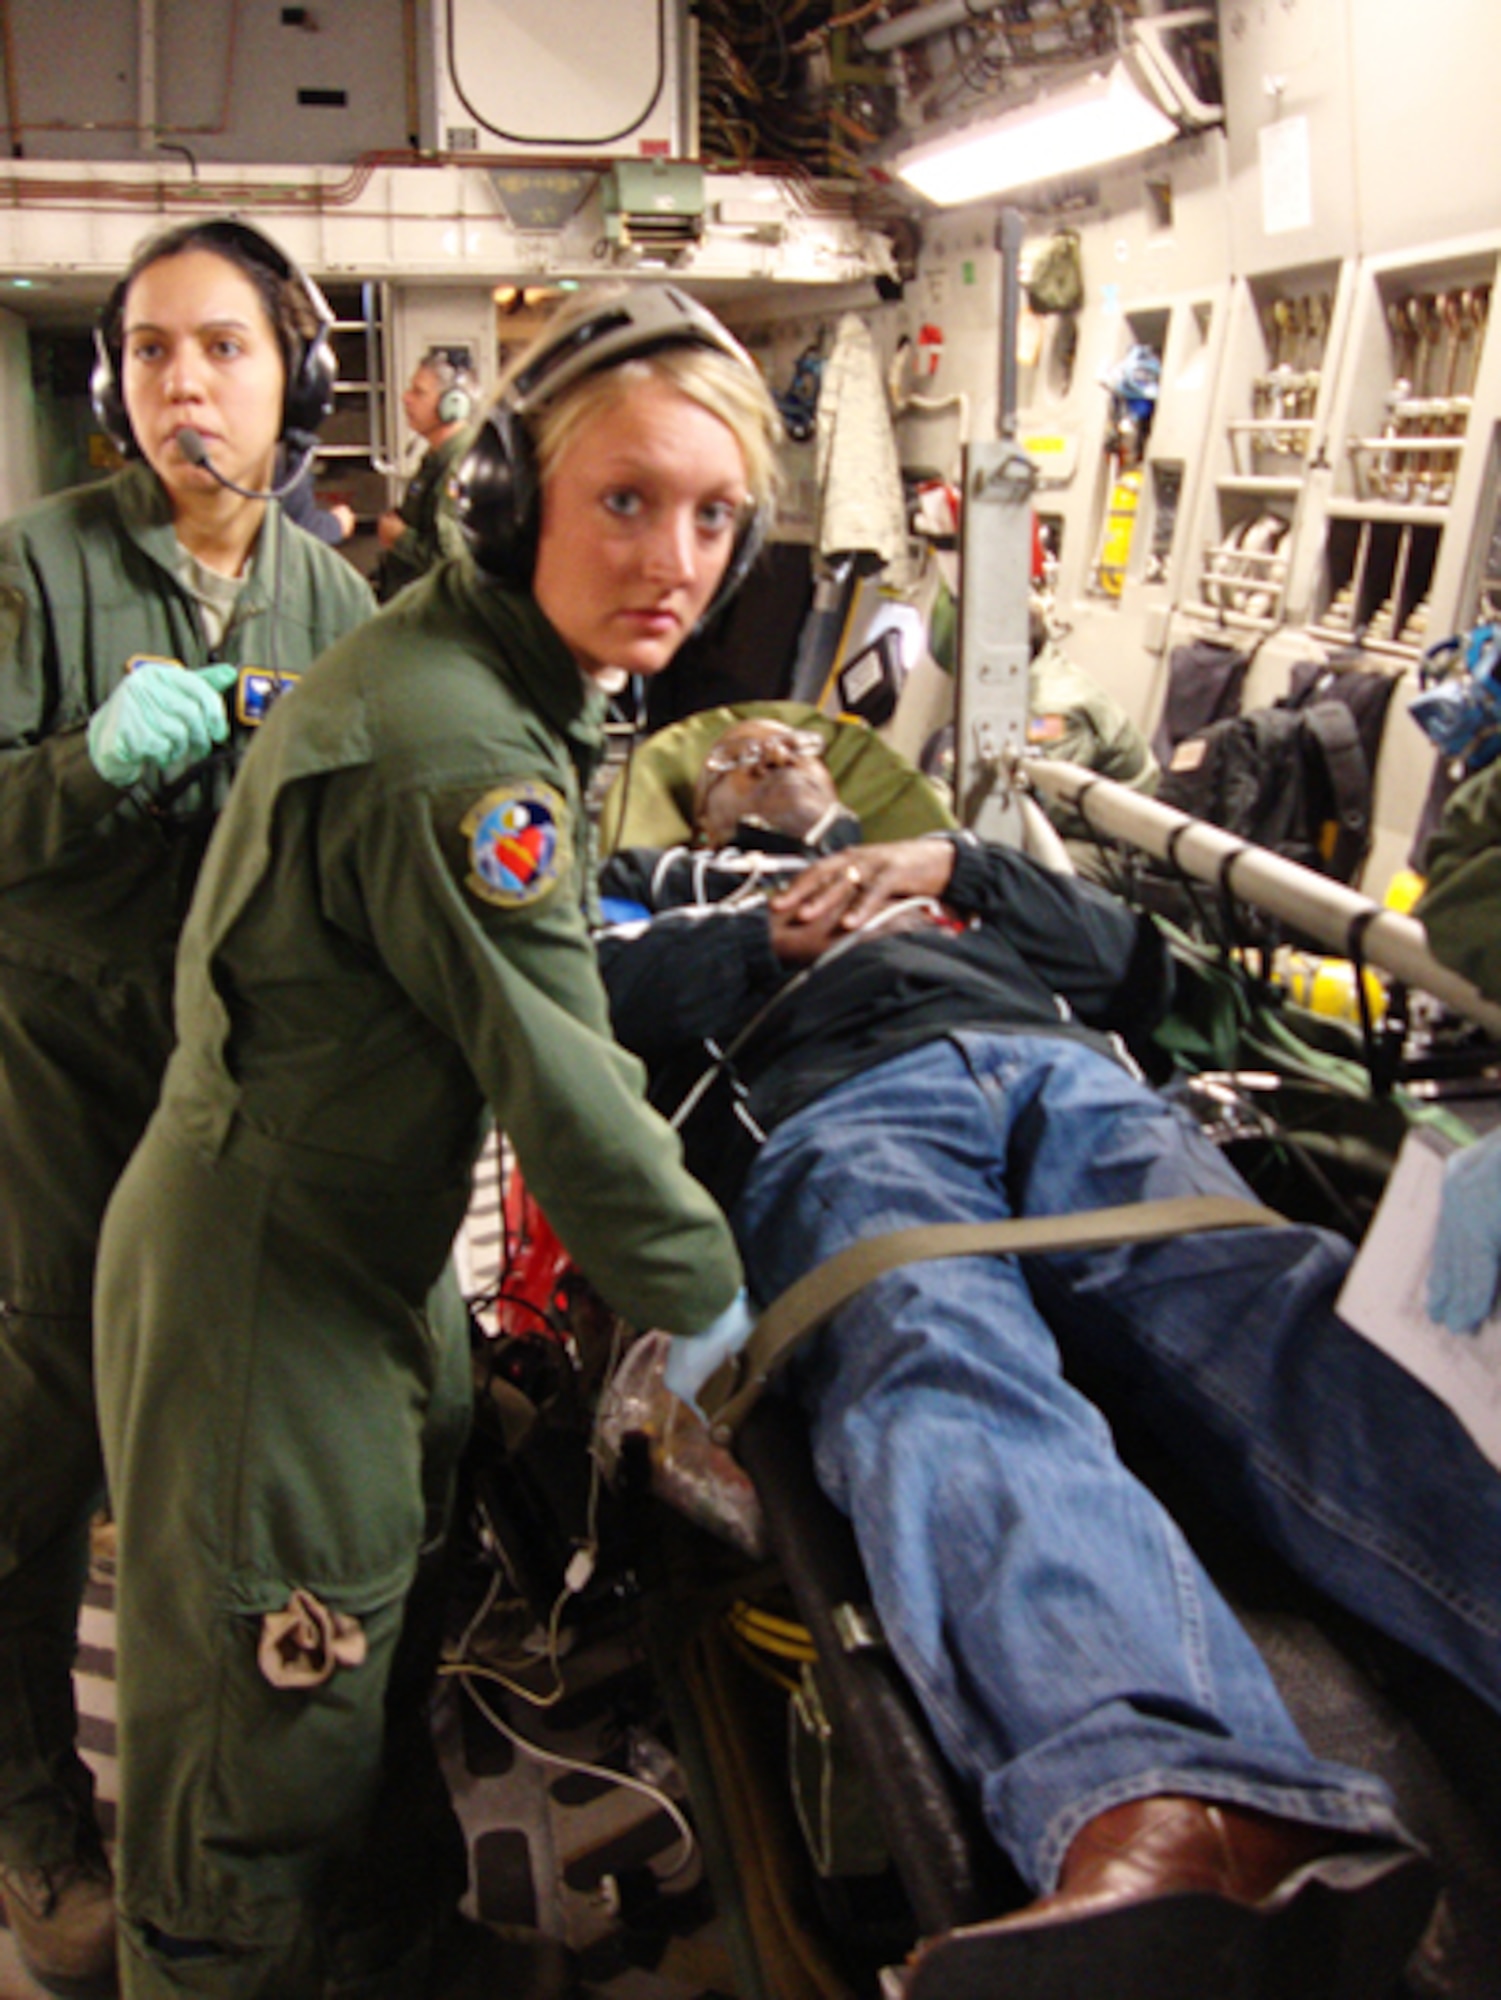 Senior Airmen Ginnette Lykins (left) and Elyse Detling, both medical technicians assigned to the 445th Aeromedical Evacuation Squadron here, listen intently as they receive instructions after securing a simulated patient to a litter during a training flight on board a C-17 Globemaster III Nov. 17. The "volunteer" heart attack victim was James Chappel, a member of the Air Force Materiel Command Community Liaison Program, representing Tinker AFB, Okla. Twenty-one members of the group flew on the C-17 to experience first-hand how members of the squadron train for real-world missions. (U.S. Air Force photo/Ron Fry)